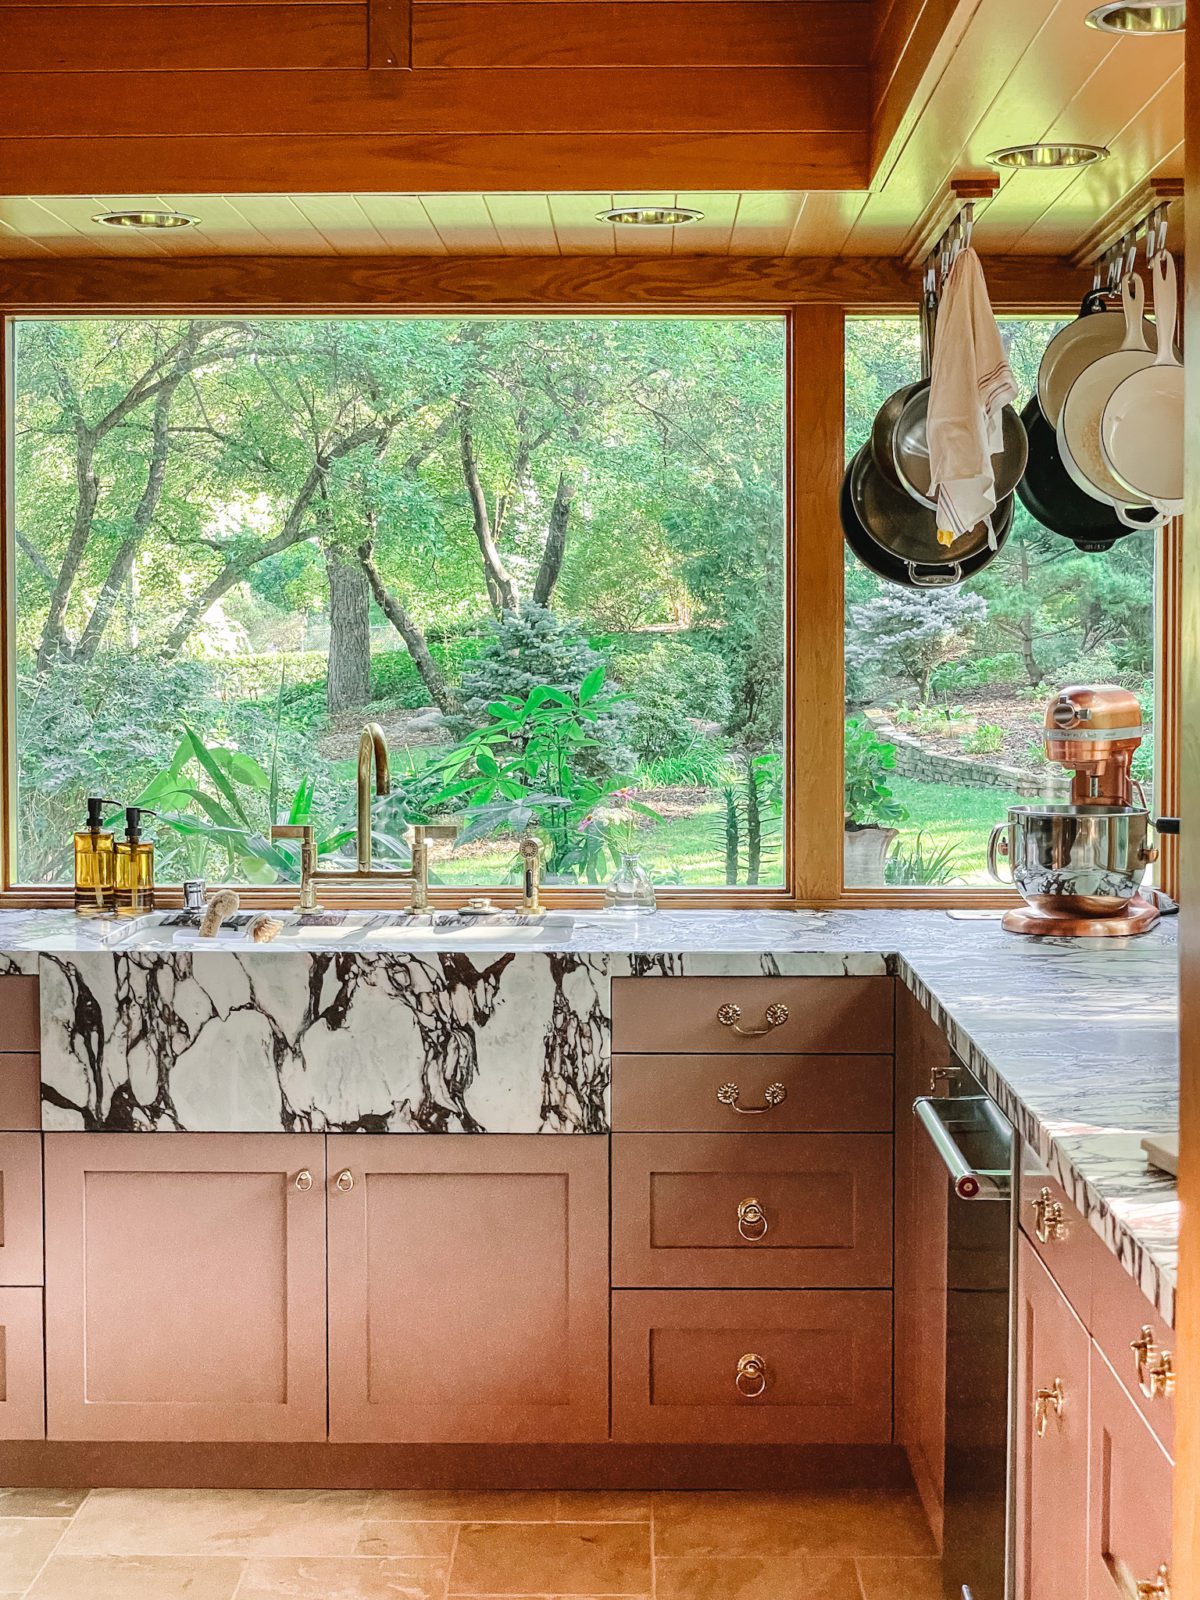 Was Our Kitchen Remodel Worth It? Here's What I Really Think, One Year Later | Wit & Delight